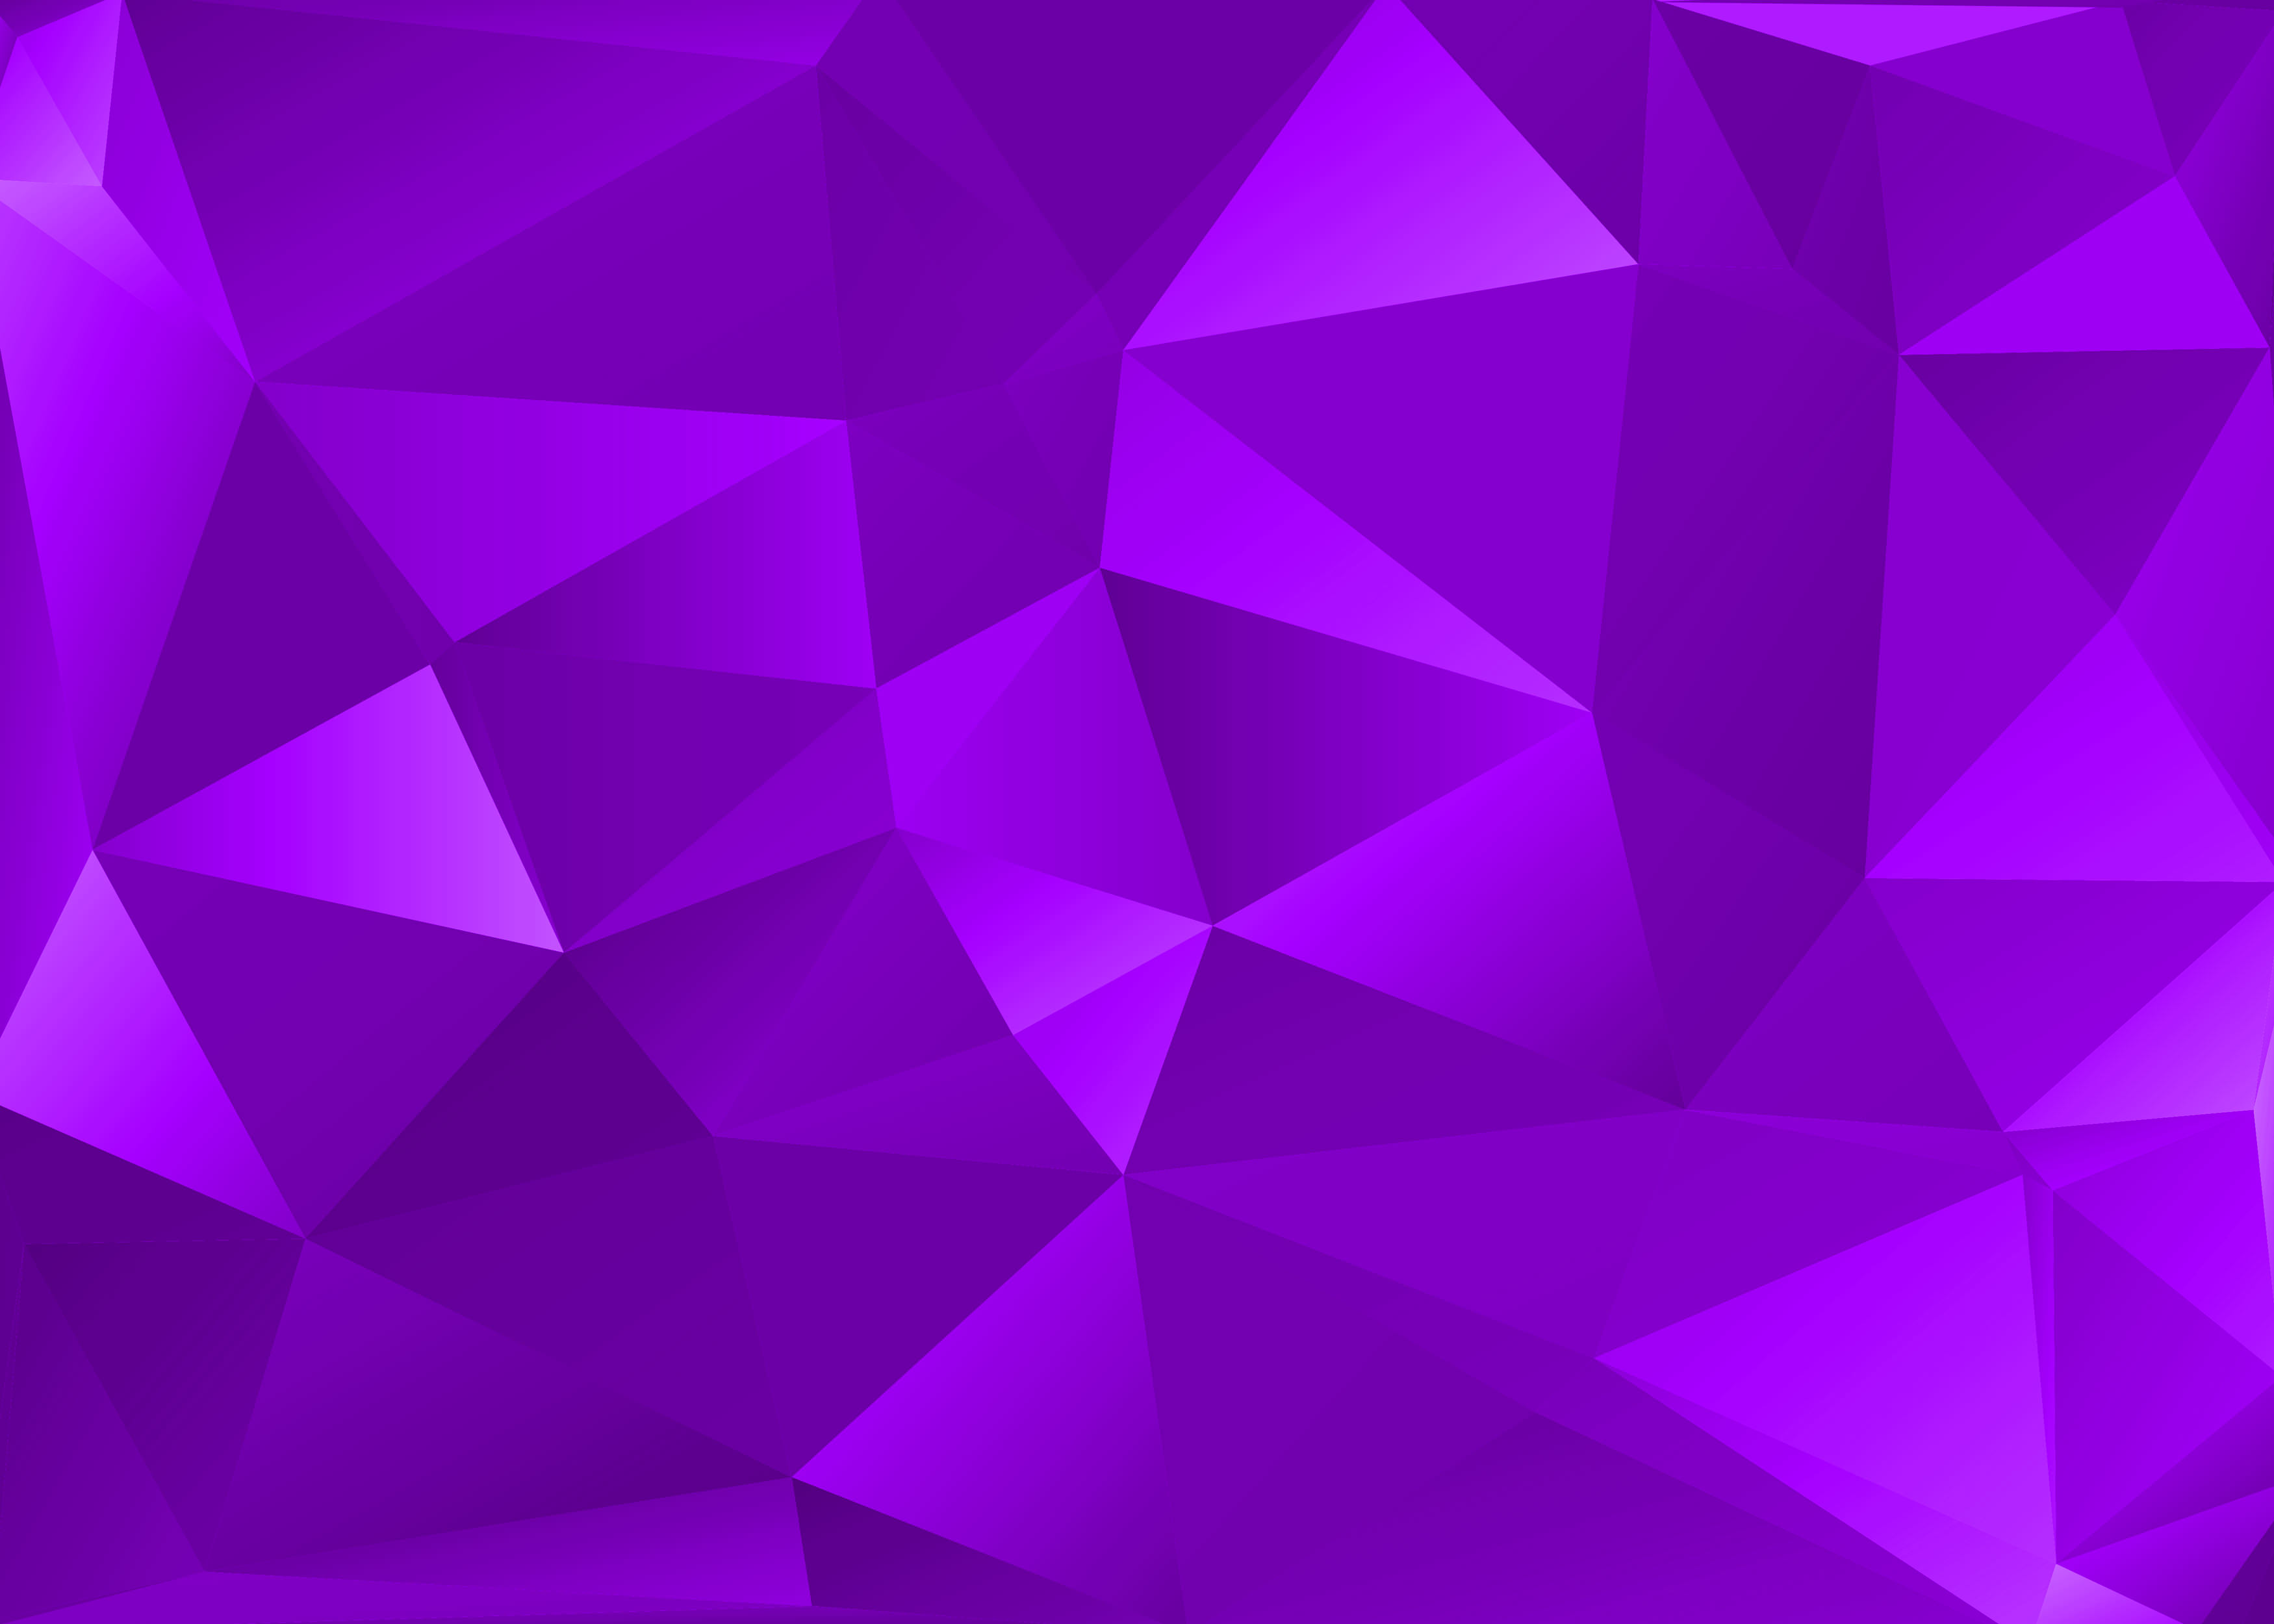  Spendid Purple Backgrounds for Free Download Free